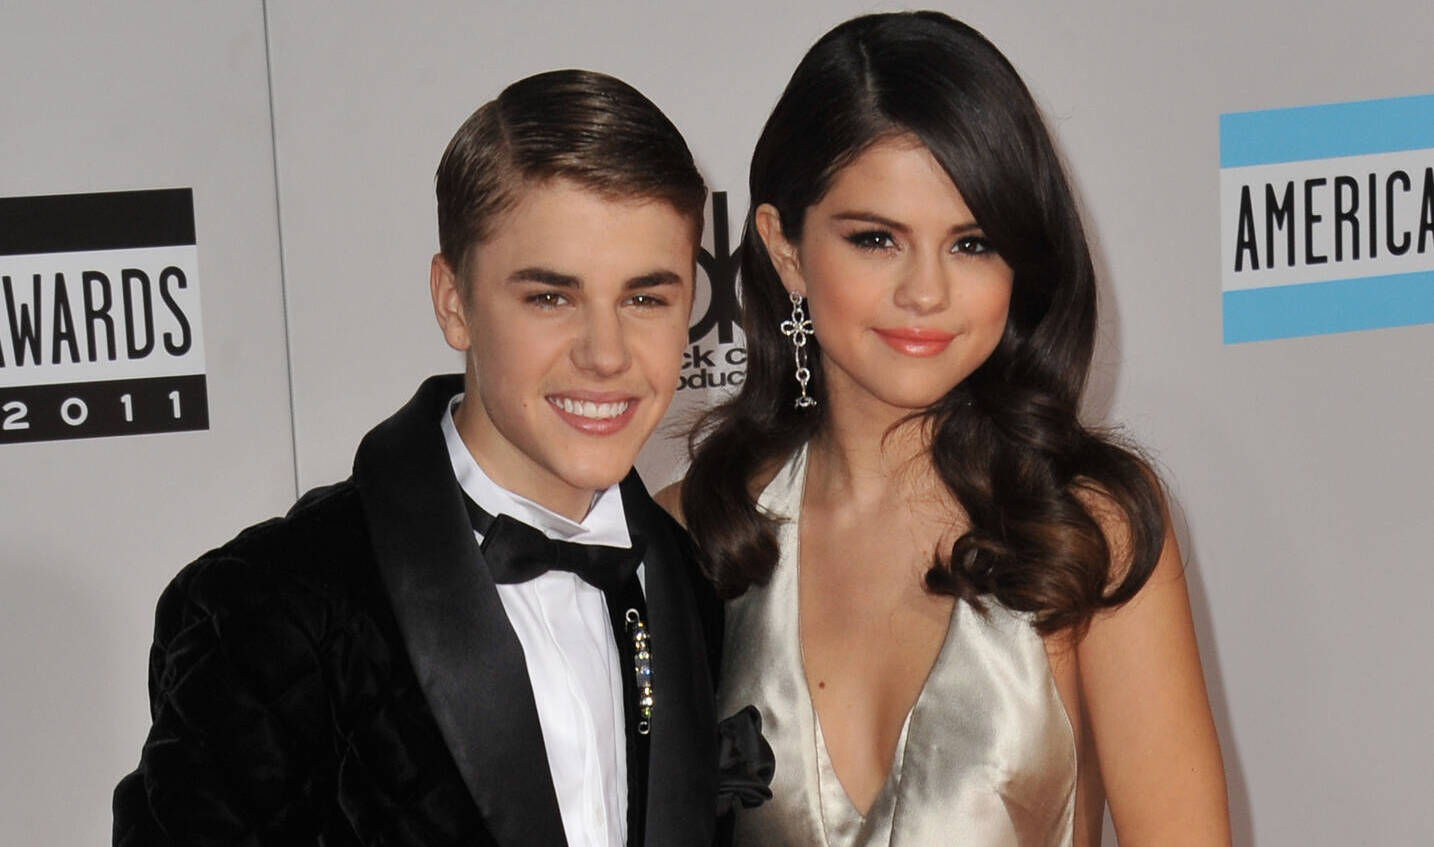 The 20 most famous onagain, offagain couples in pop culture history